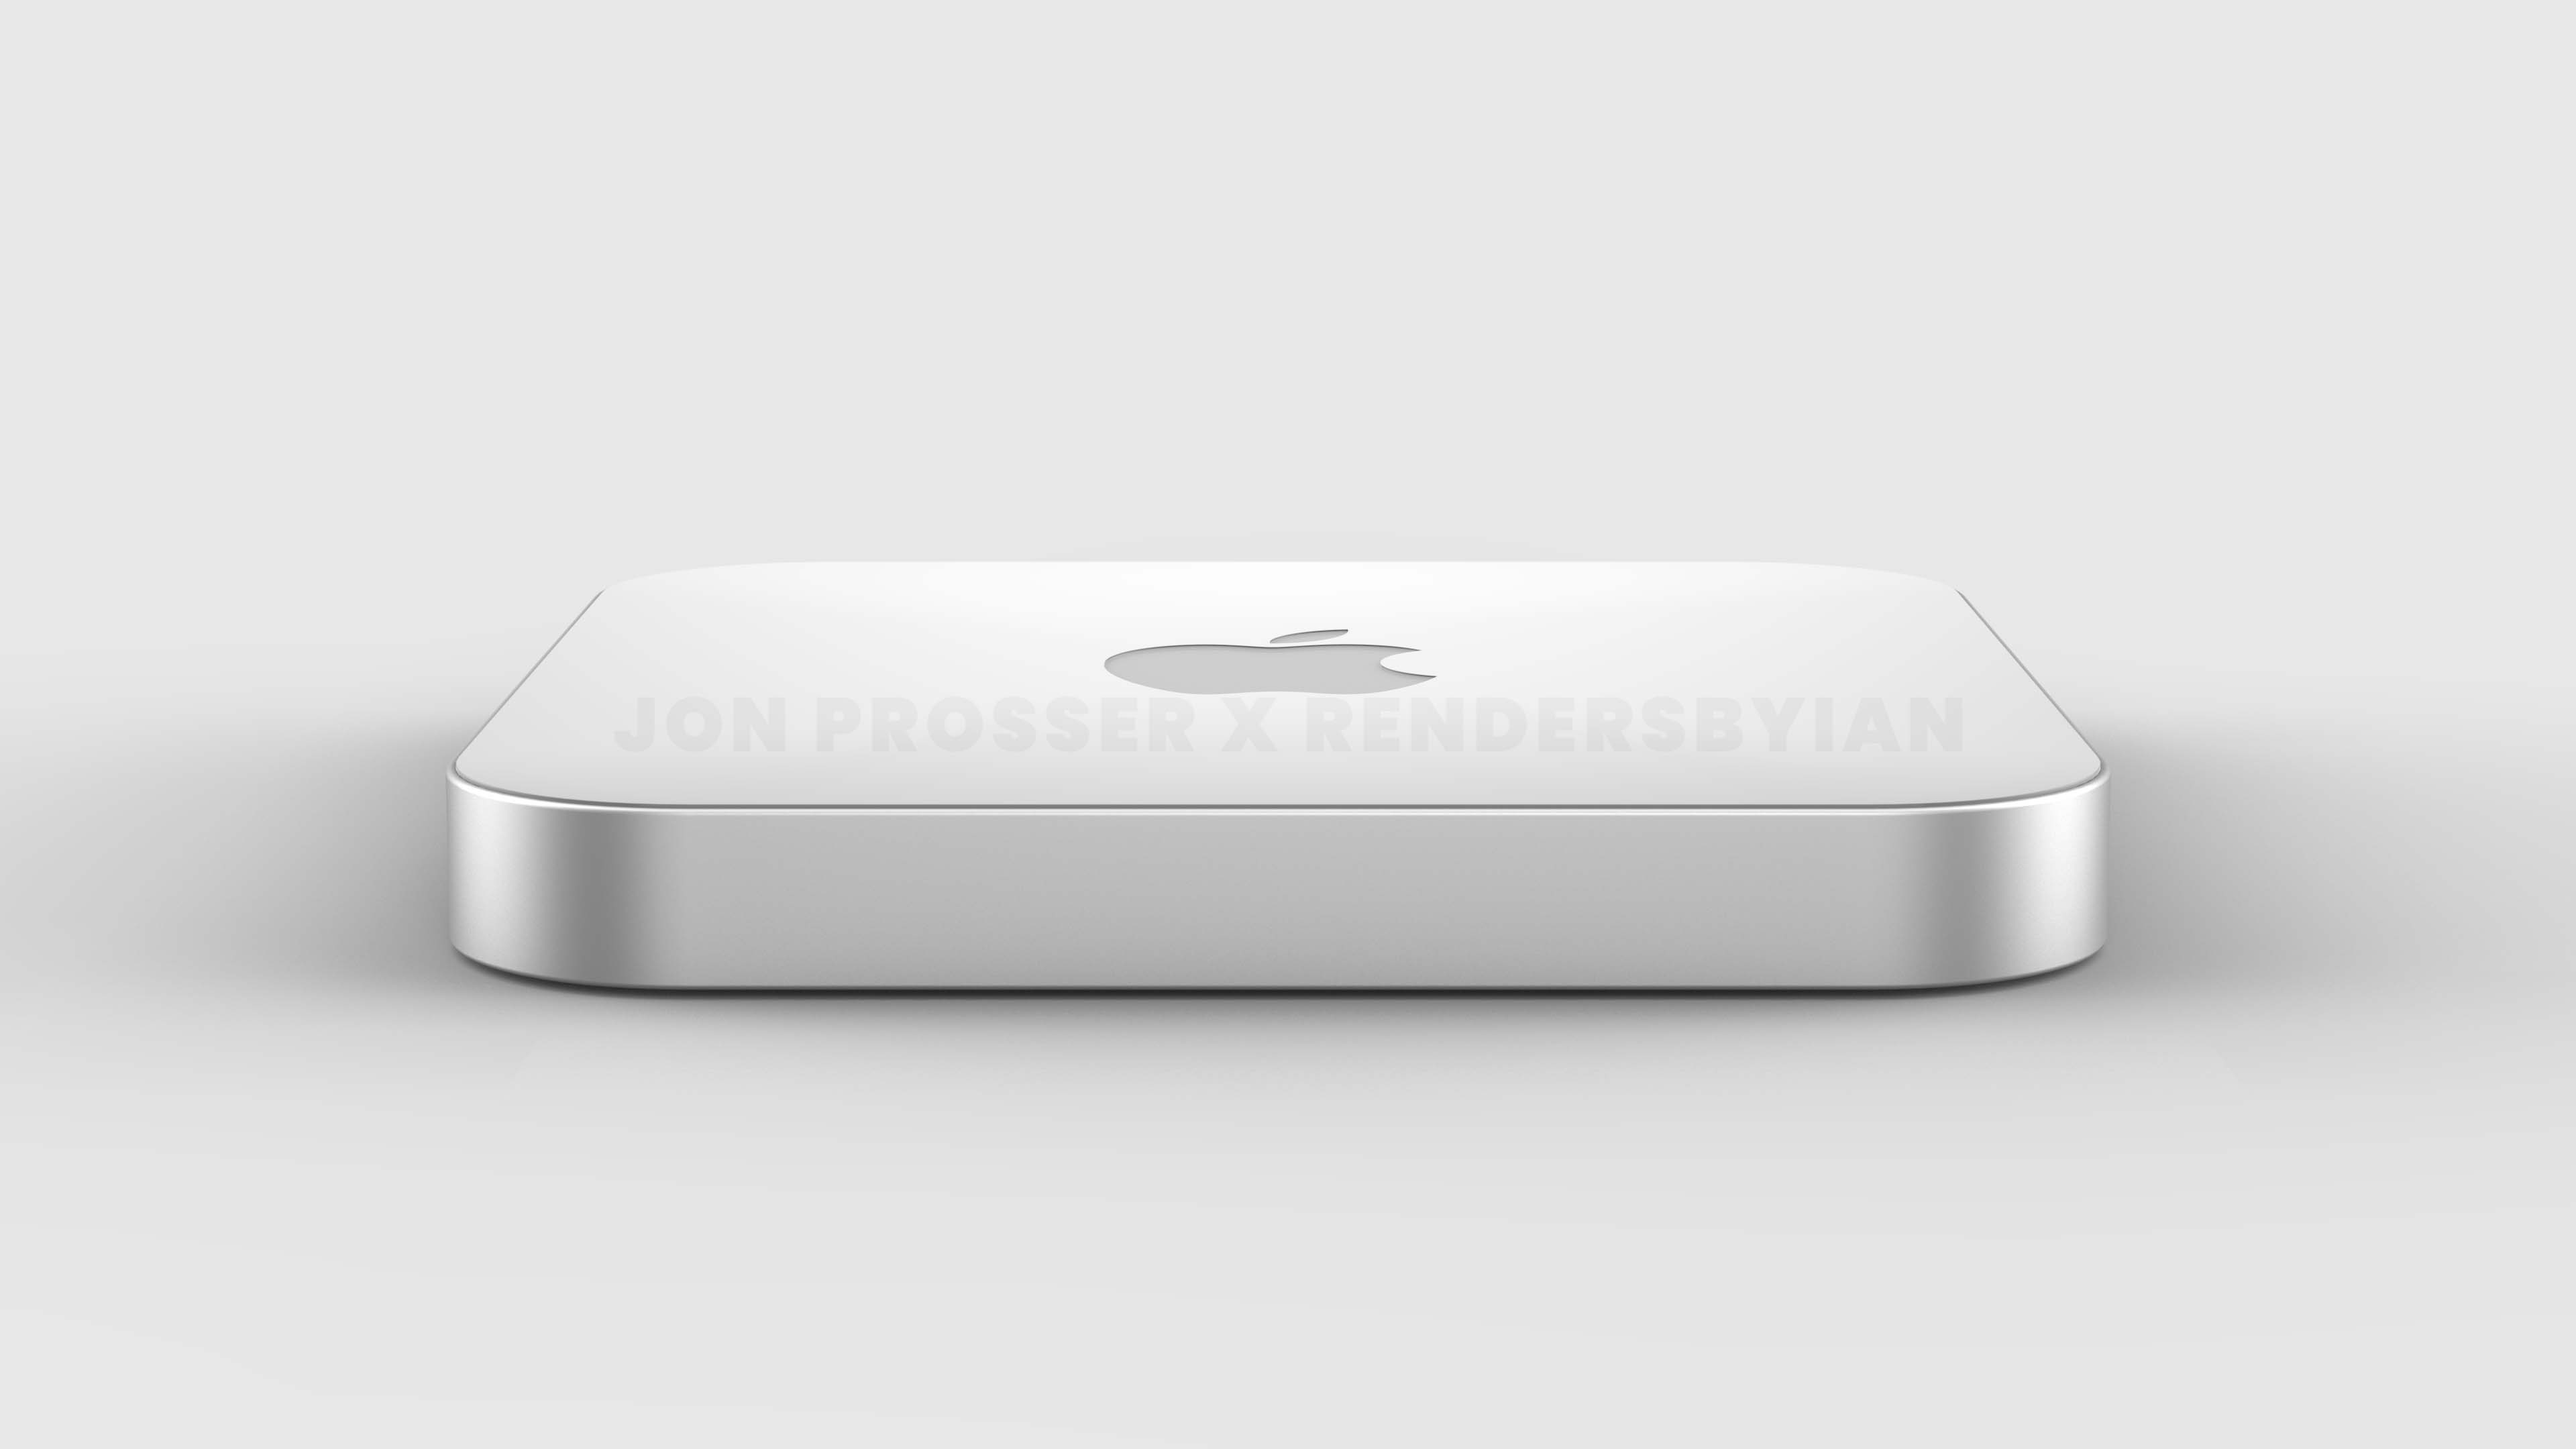 M1X Mac mini reportedly to feature thinner chassis redesign, use 